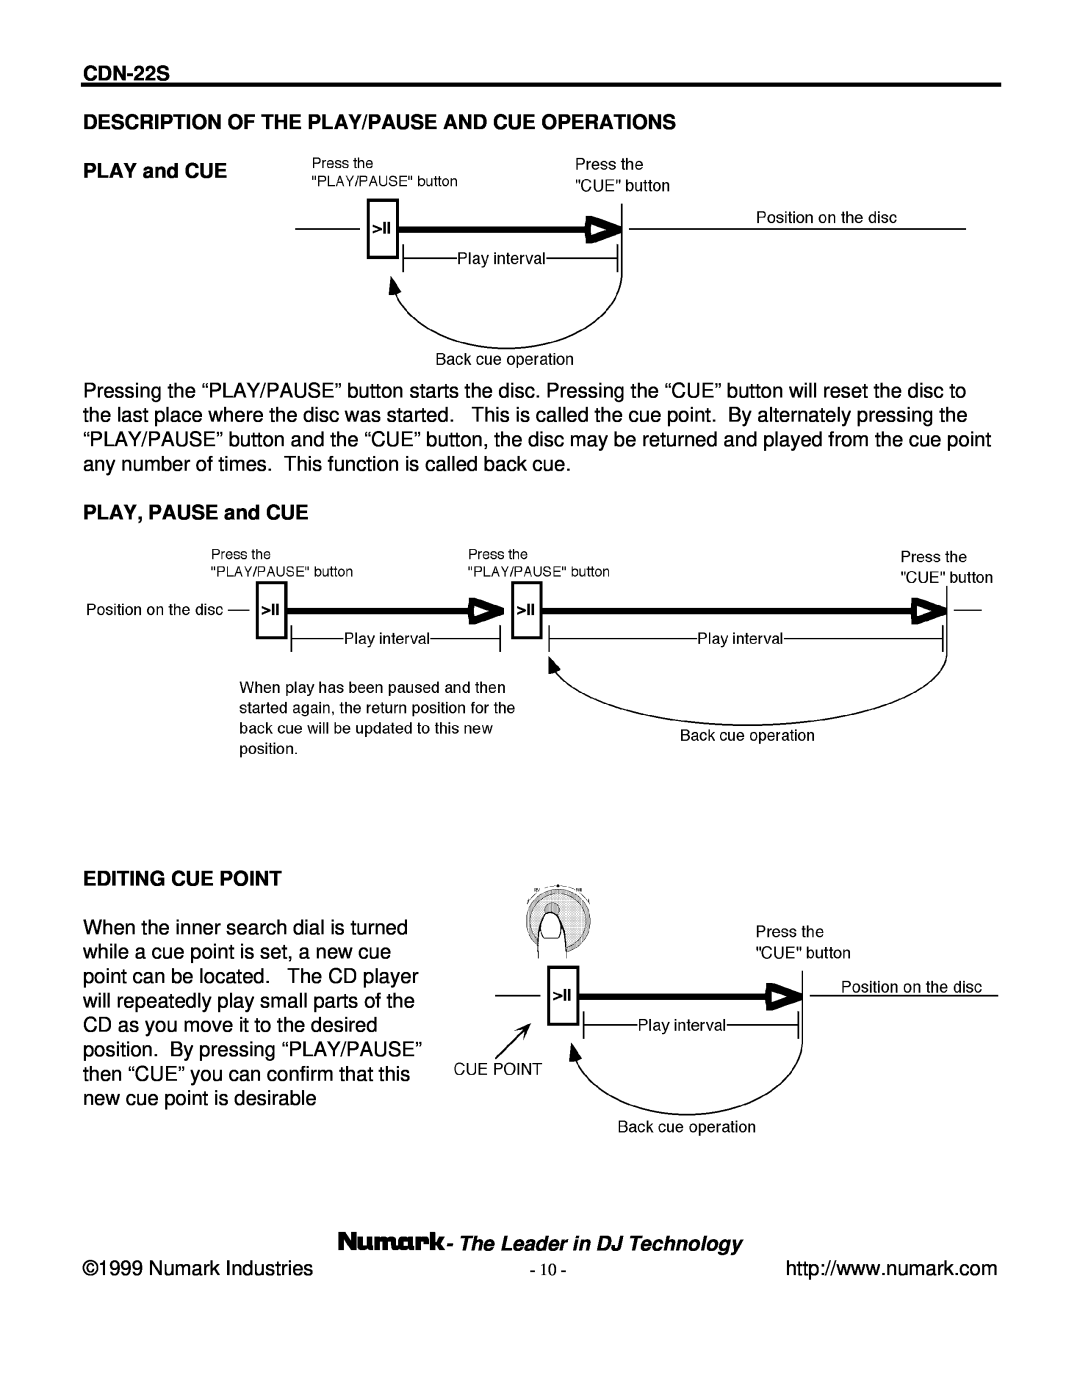 Numark Industries CDN-22S Description Of The Play/Pause And Cue Operations, PLAY and CUE, The Leader in DJ Technology 